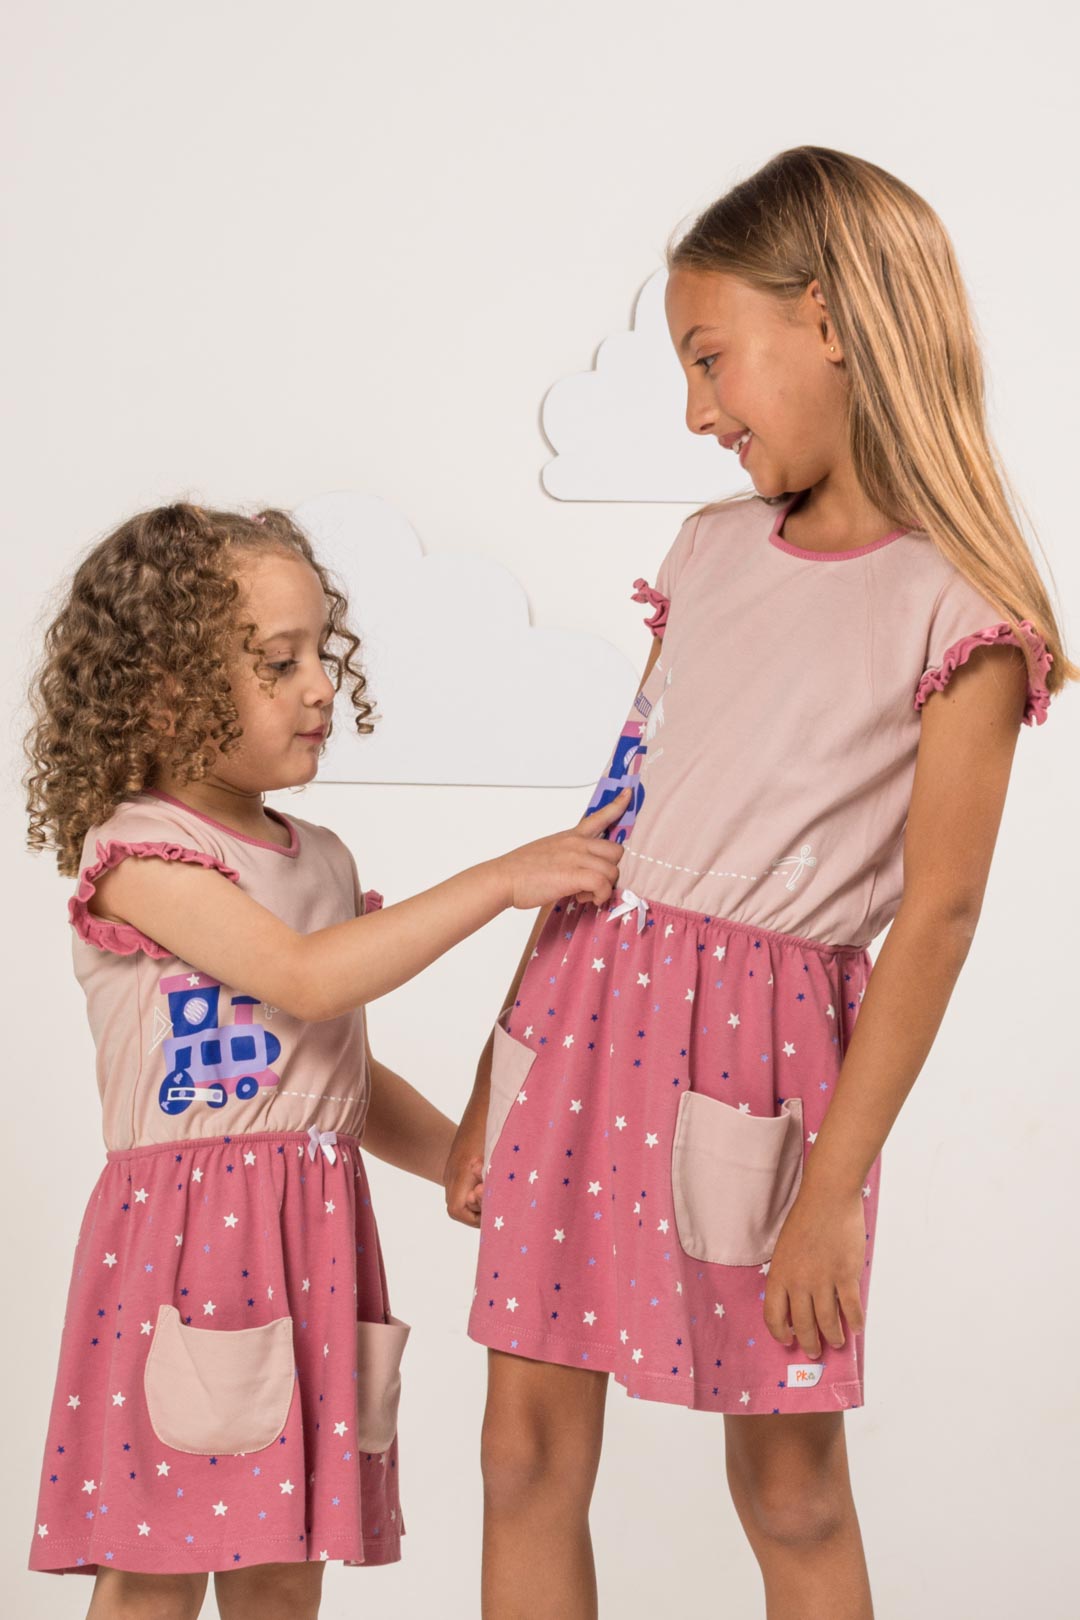 Girls wearing pink train dress with pockets by prisma kiddos